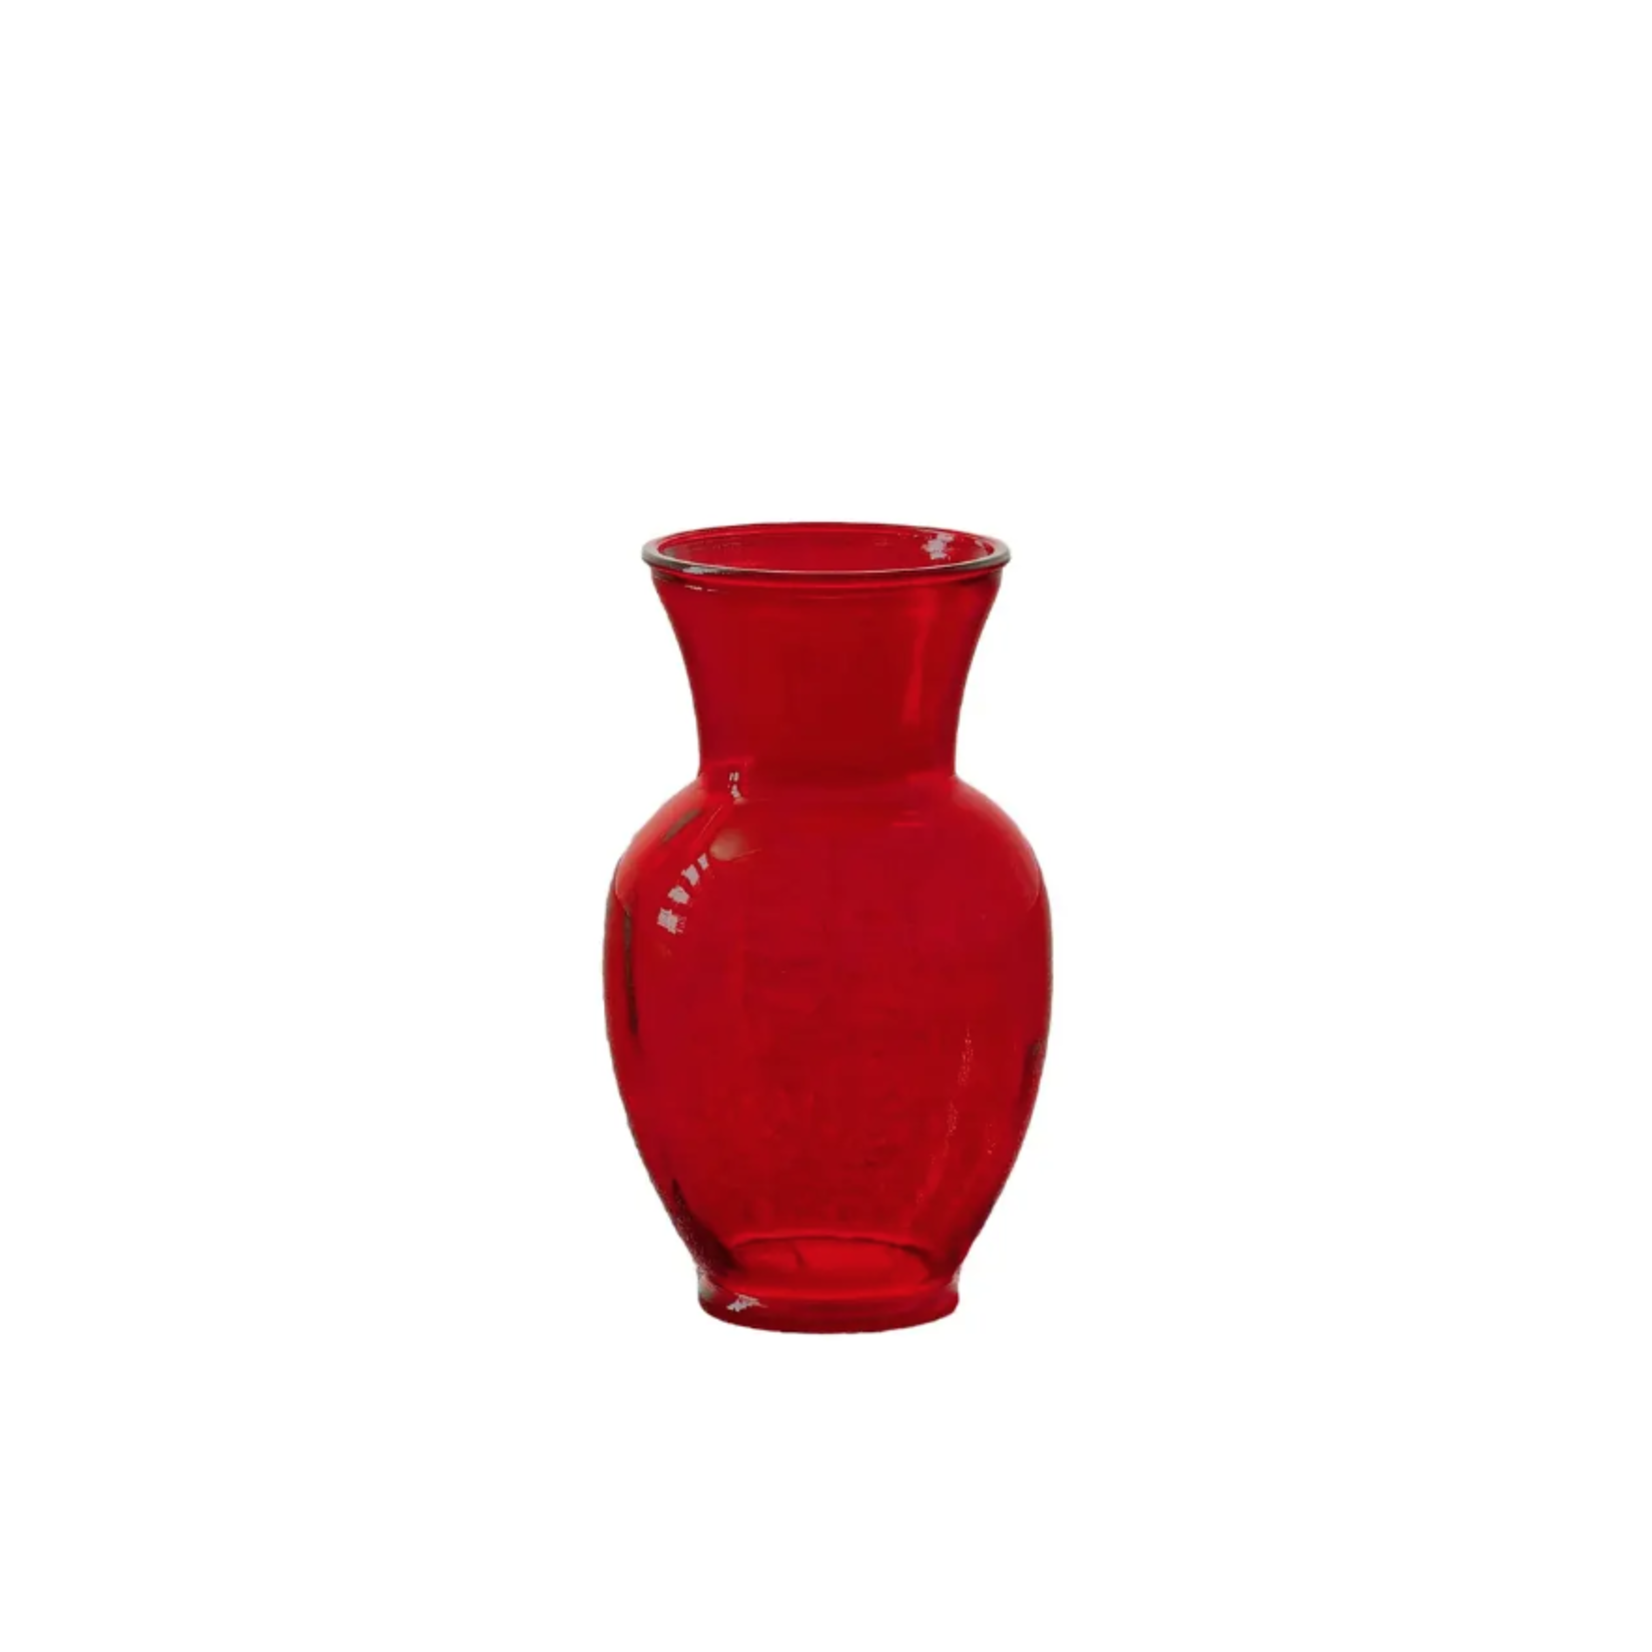 50% OFF WAS $7 NOW $3.49. 8.75”H X 5.5” RED RUBY GLASS CLASSIC URN GINGER VASE